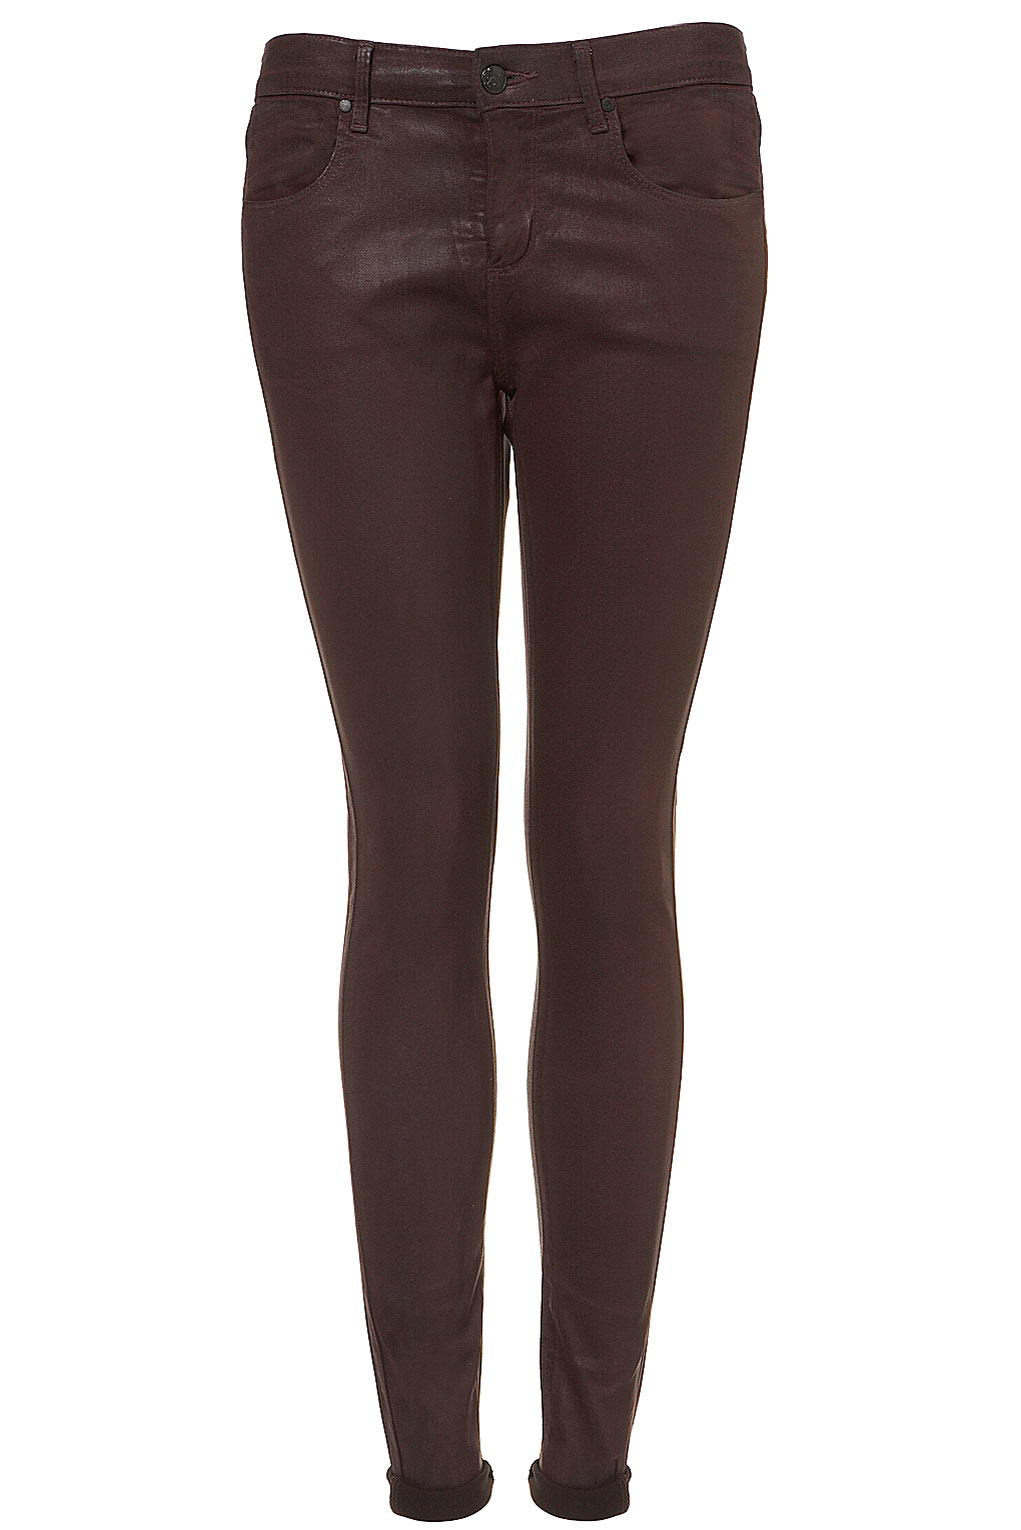 TOPSHOP Moto Coated Leigh Jeans in Burgundy (Purple) - Lyst